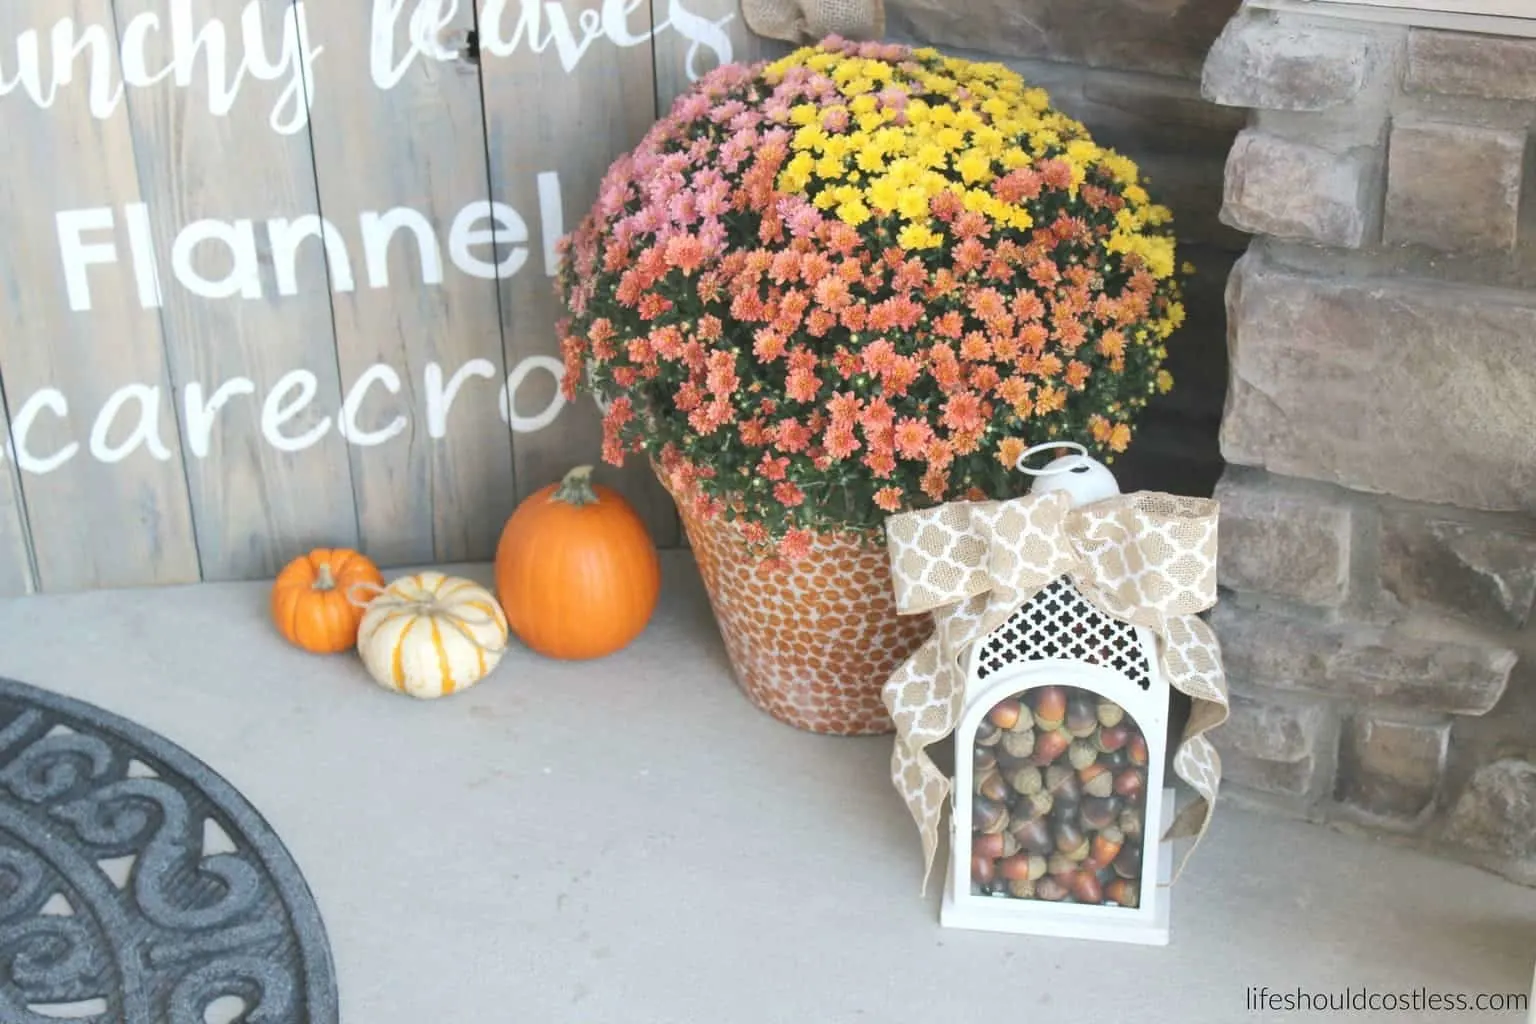 Rustic fall porch decor reveal. See this post and many more popular decor pins at lifeshouldcostless.com. Lantern filled with acorns.